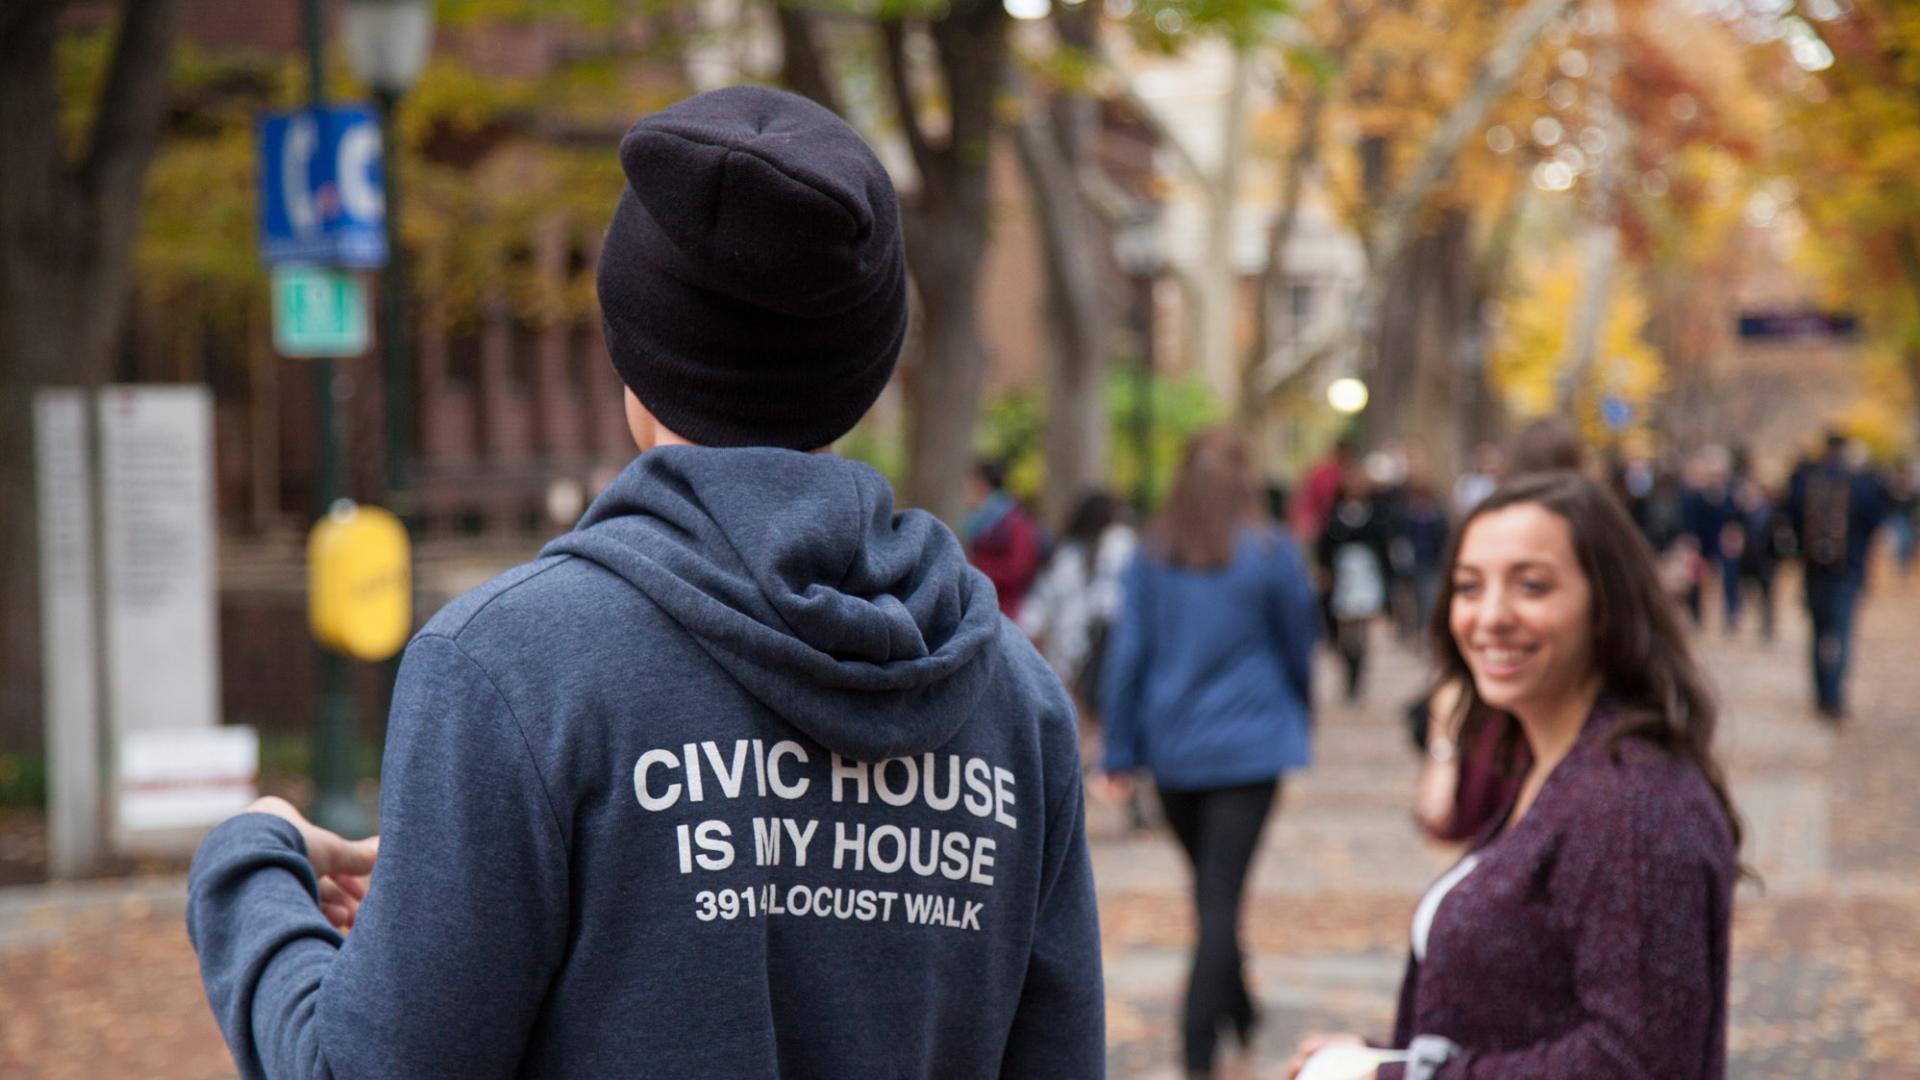 Student on Locust Walk wearing hoodie that says "Civic House Is My House"